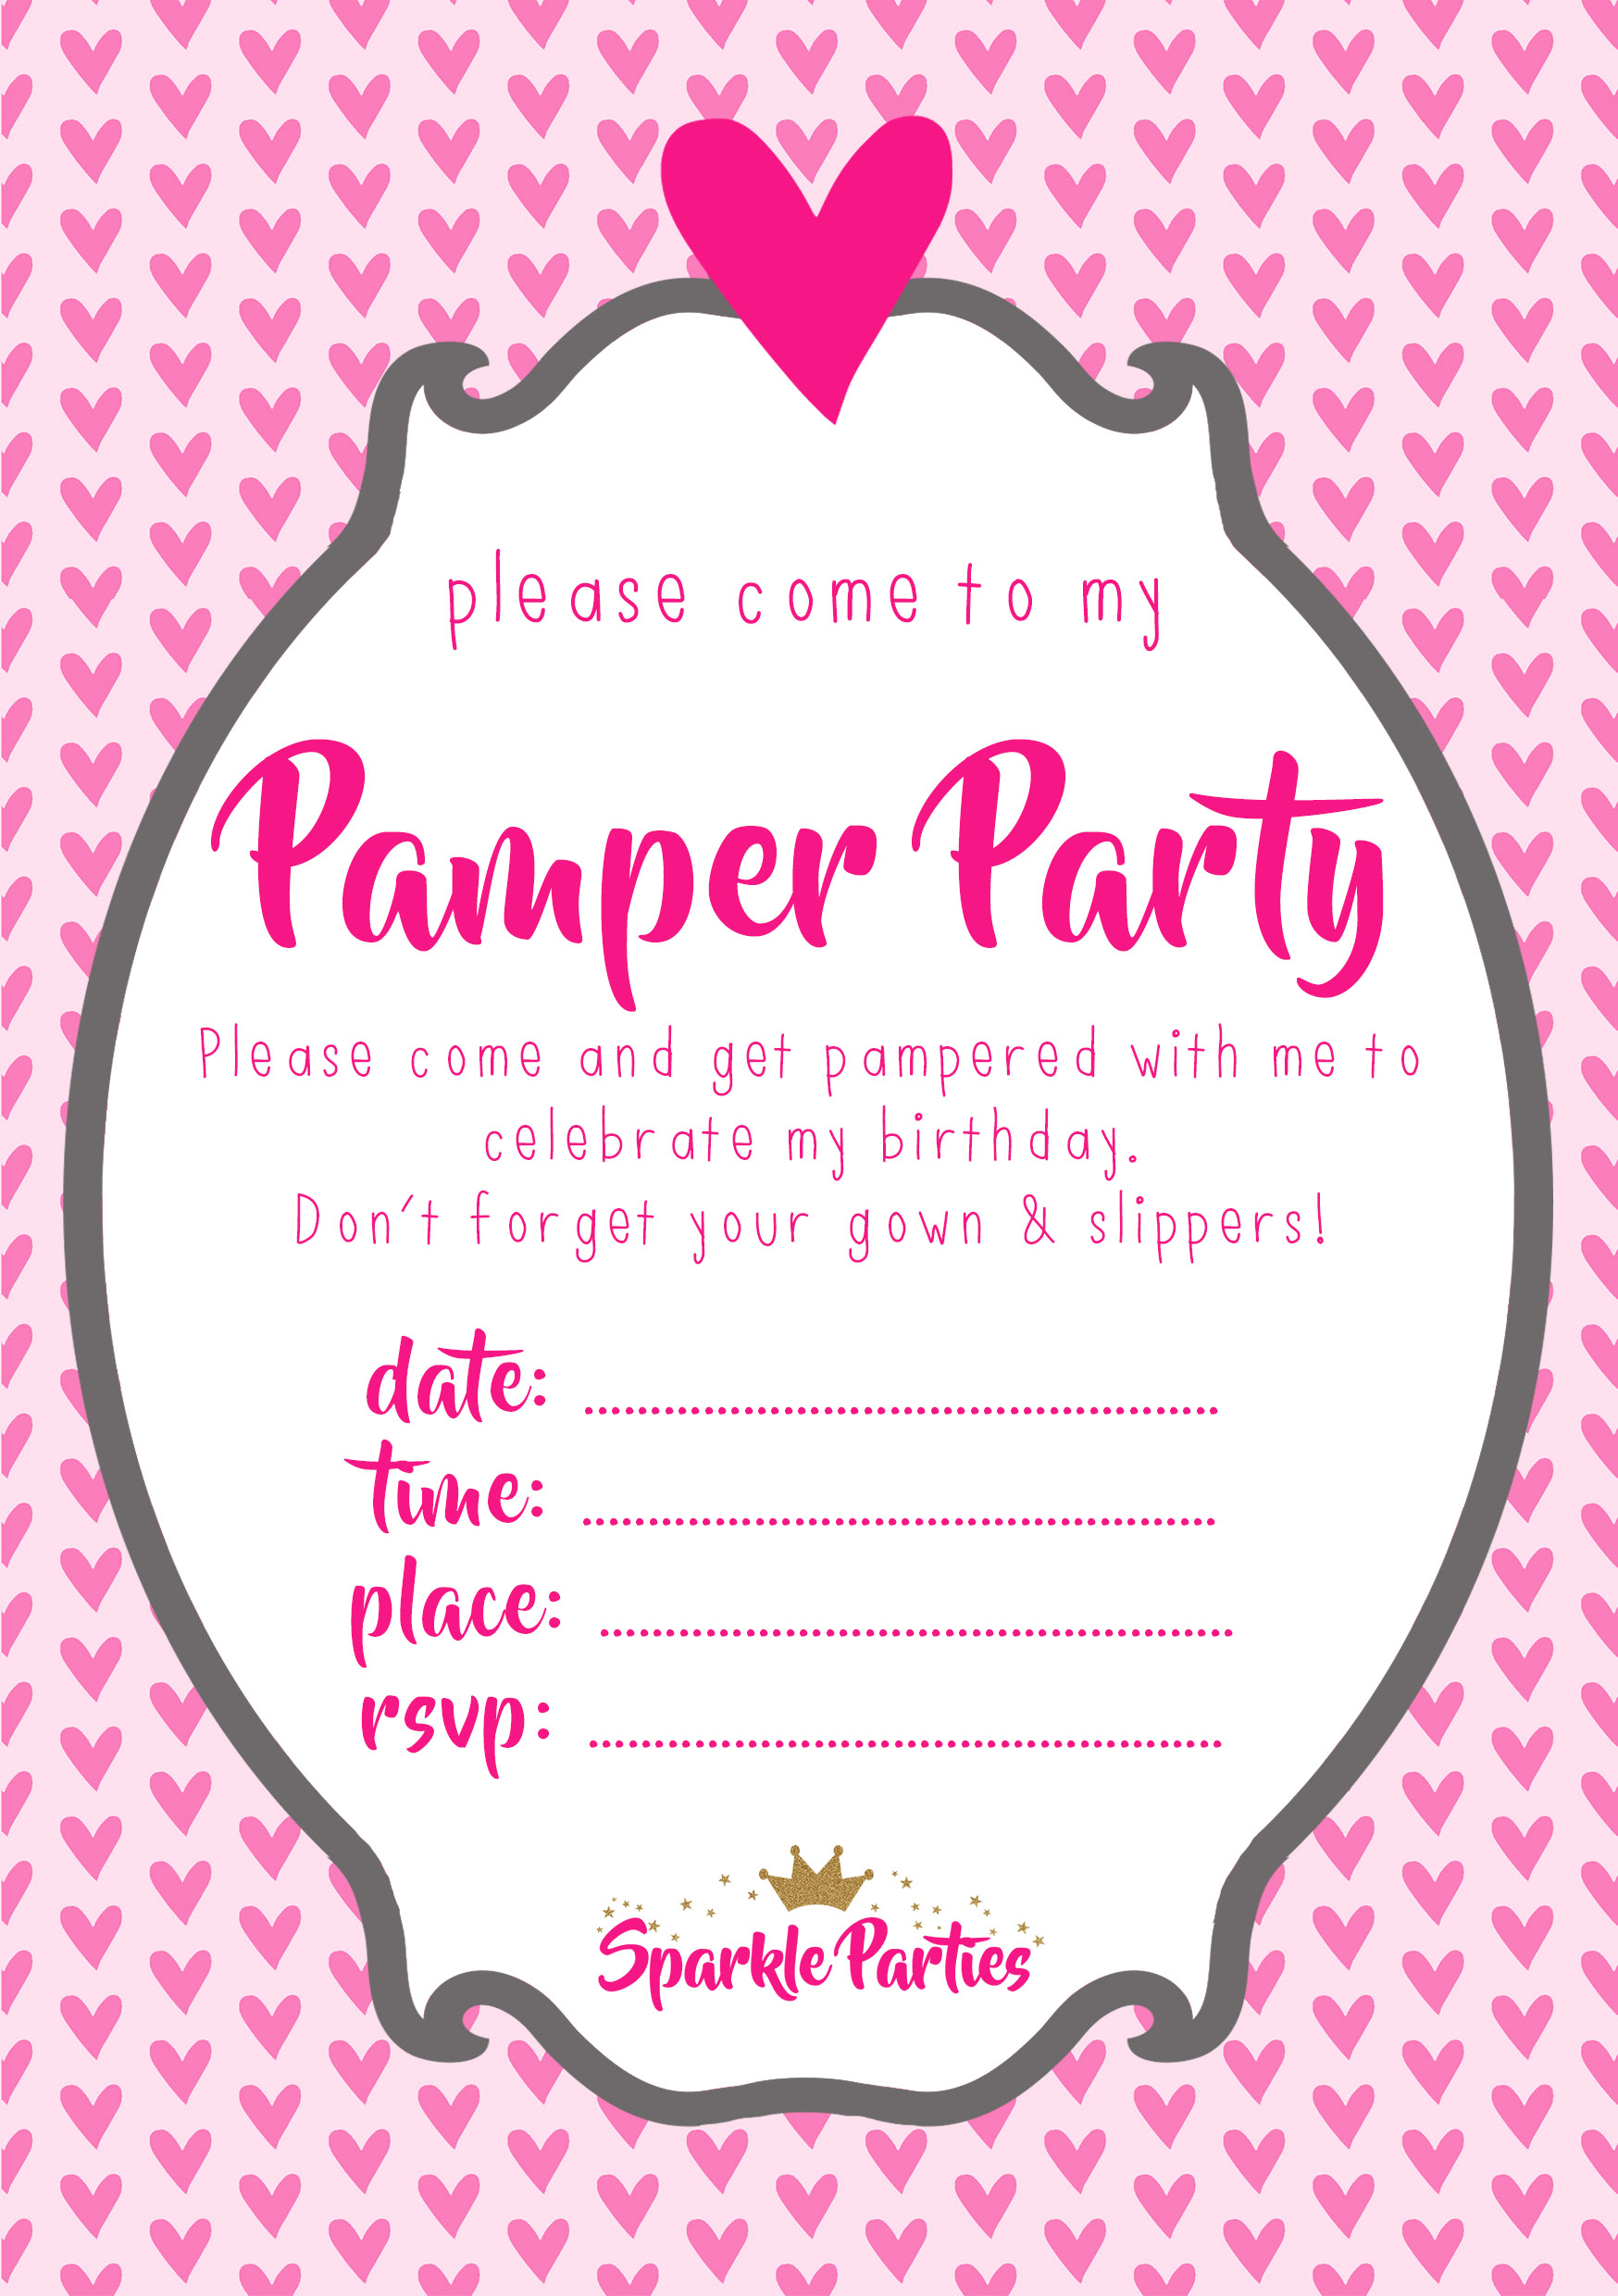 Pamper Party Invitation Templates • Business Template Ideas